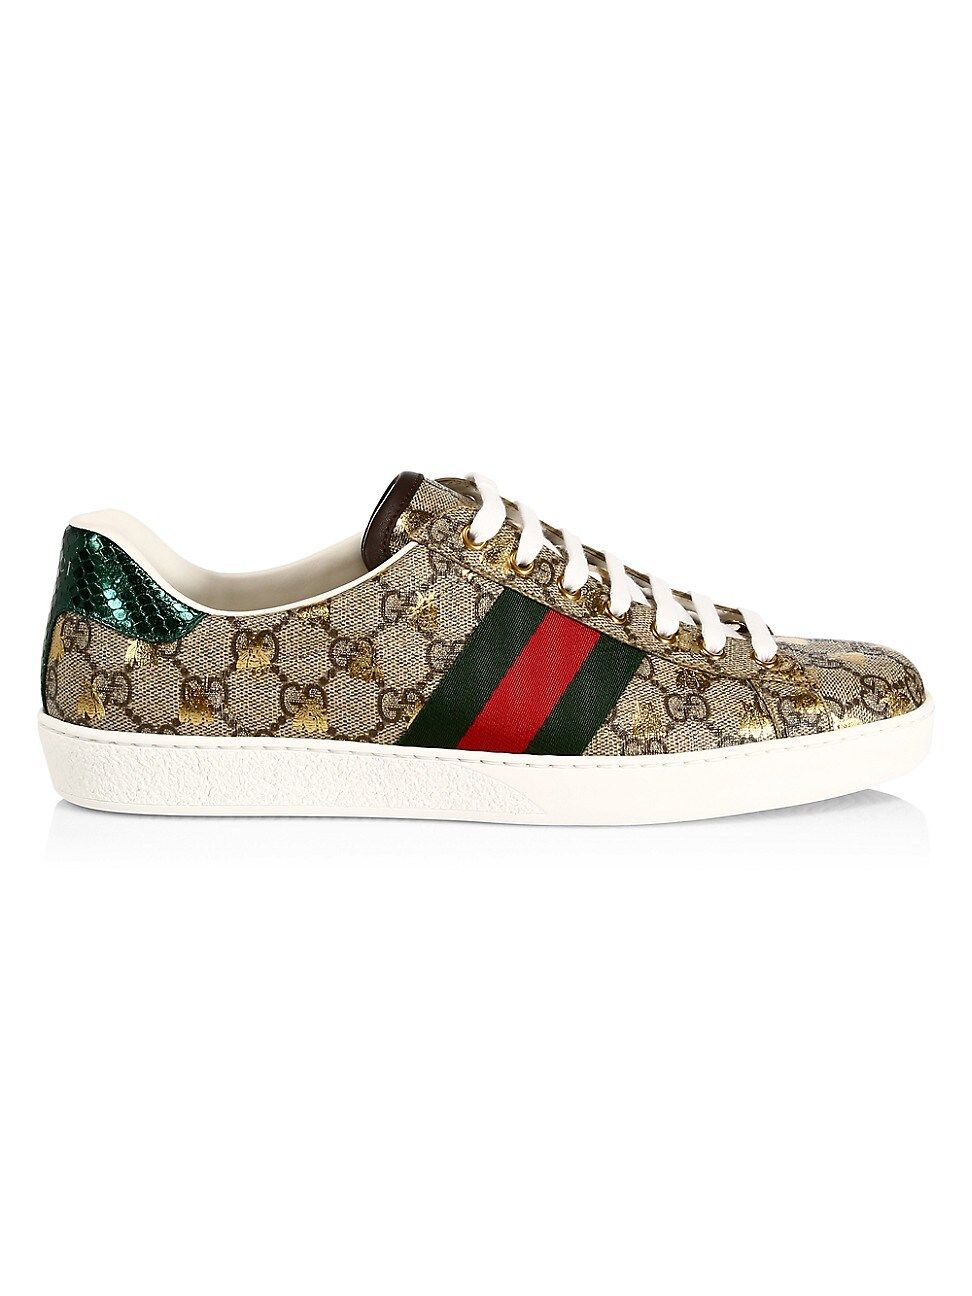 New Ace Stripe GG Supreme Low-Top Sneakers | Saks Fifth Avenue